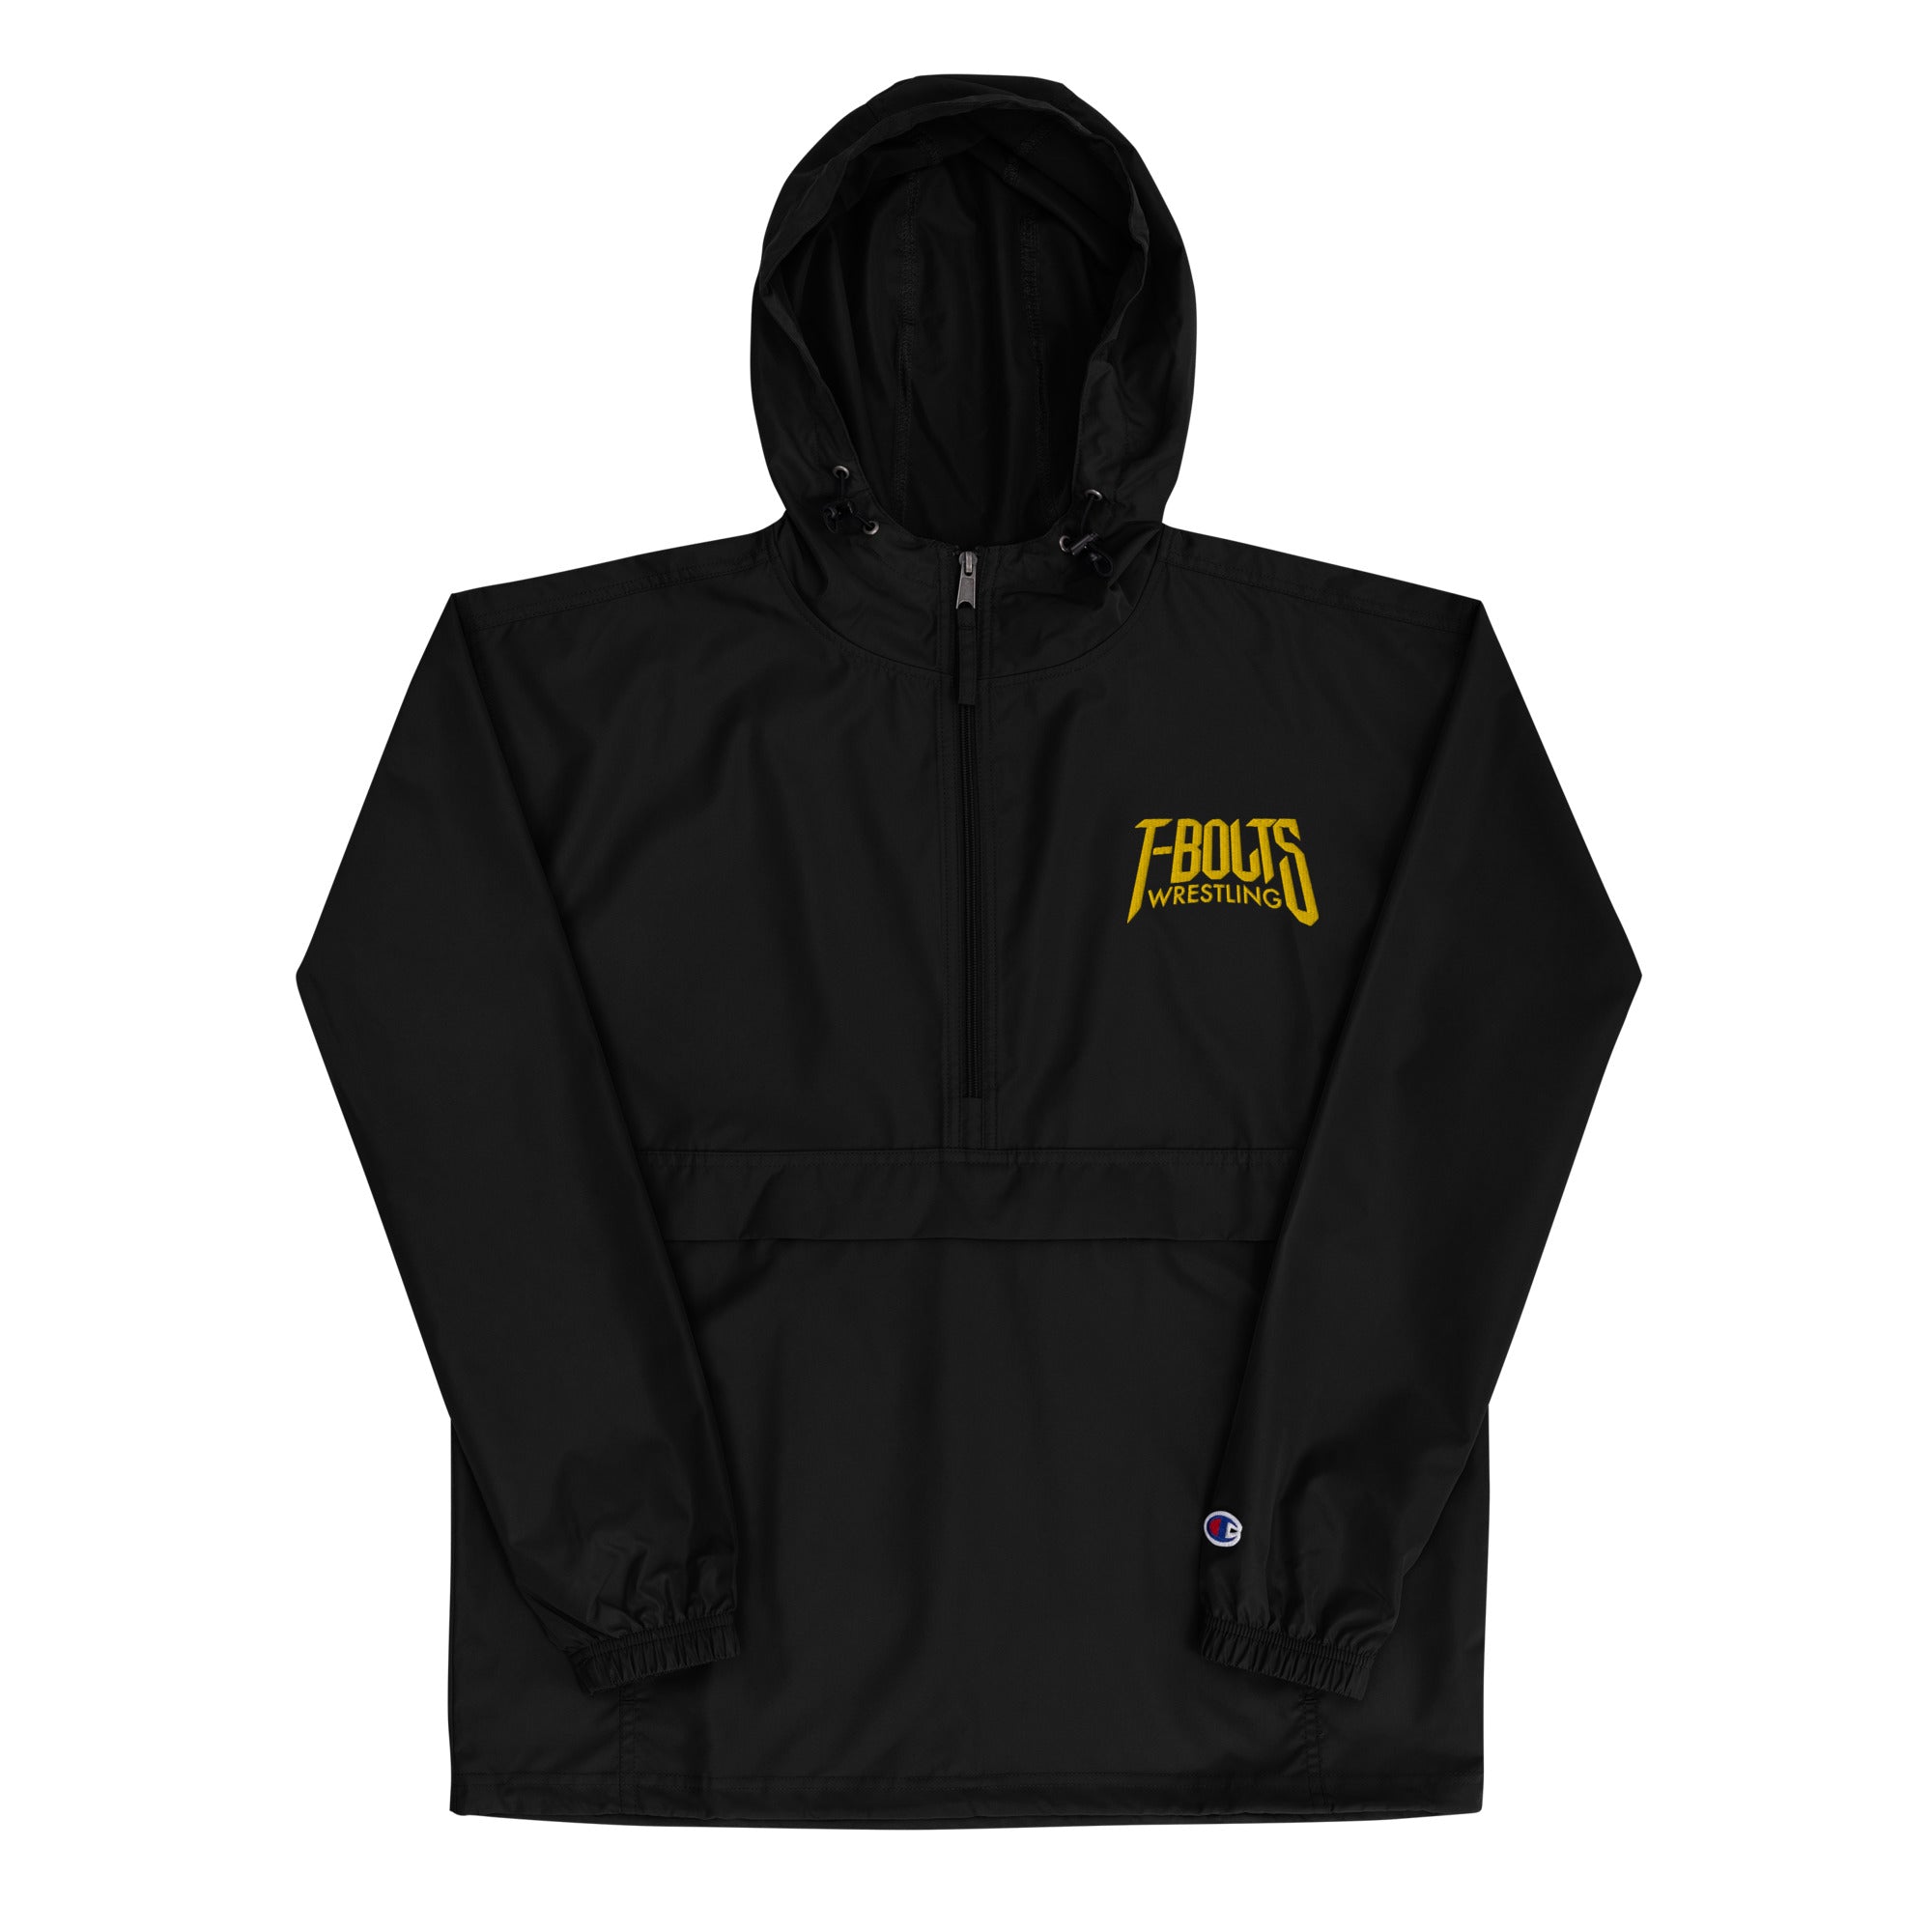 Andrew High School Embroidered Champion Packable Jacket